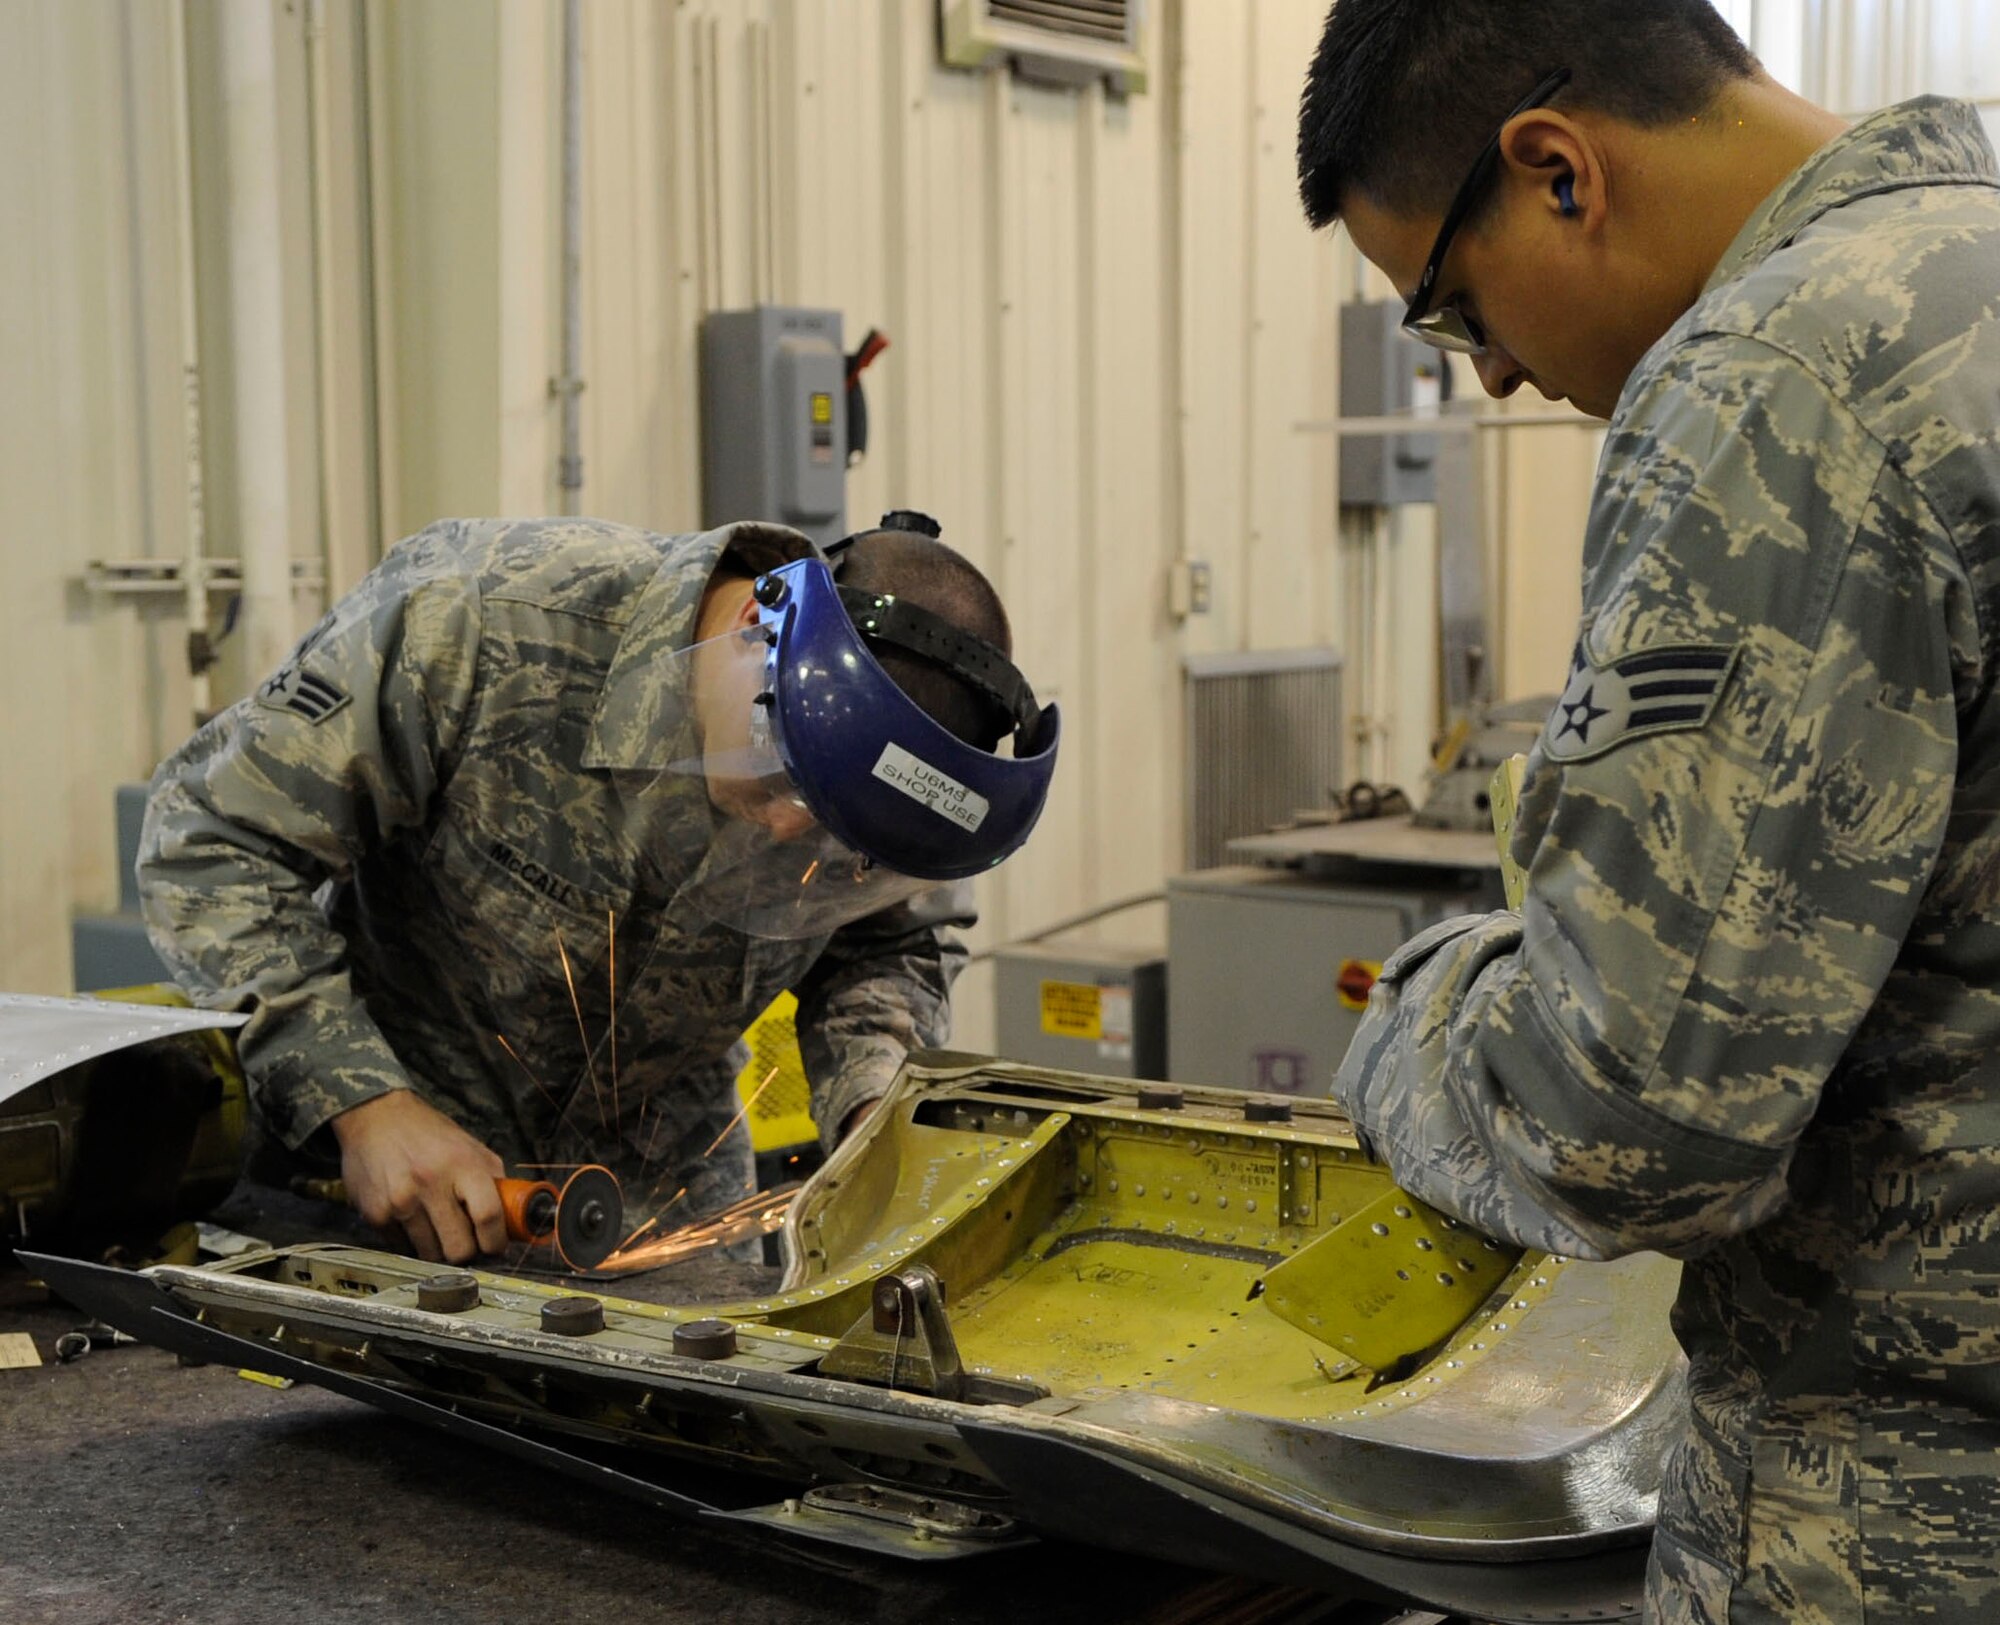 Senior Airman Colton McCall and Senior Airman Joshua Flores, 2nd Maintenance Squadron aircraft structural maintenance journeymen, work together to fix a drag chute door from a B-52 Oct. 13 at Barksdale Air Force Base, La. McCall and Flores are active-duty Airmen working with reservists at the 307th Maintenance Squadron as part of the Total Force Integration Program. (U.S. Air Force photo/Airman 1st Class Andrea F. Liechti)(RELEASED)